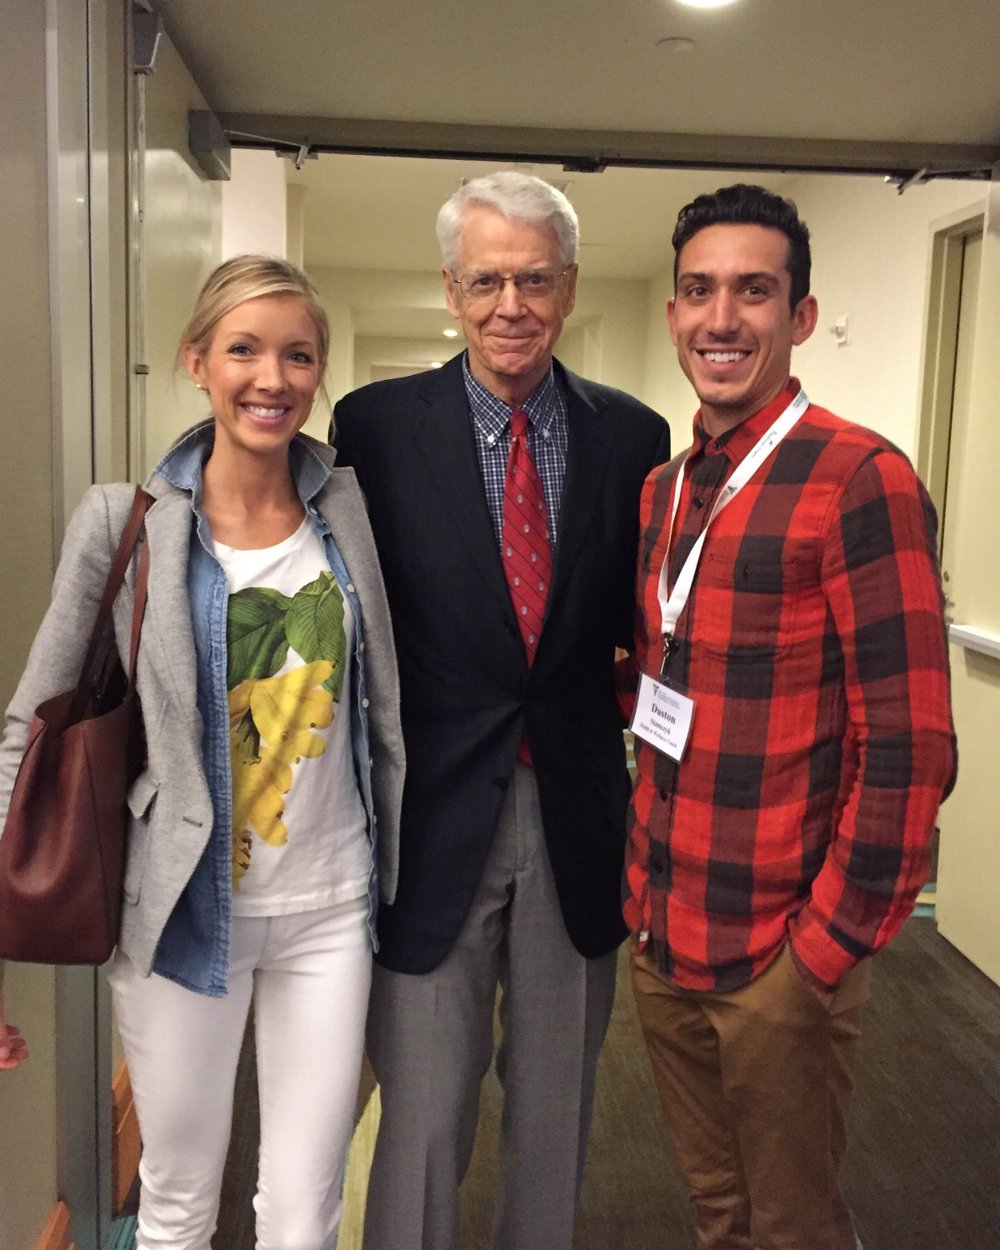 Dr. Esselstyn of Forks Over Knives